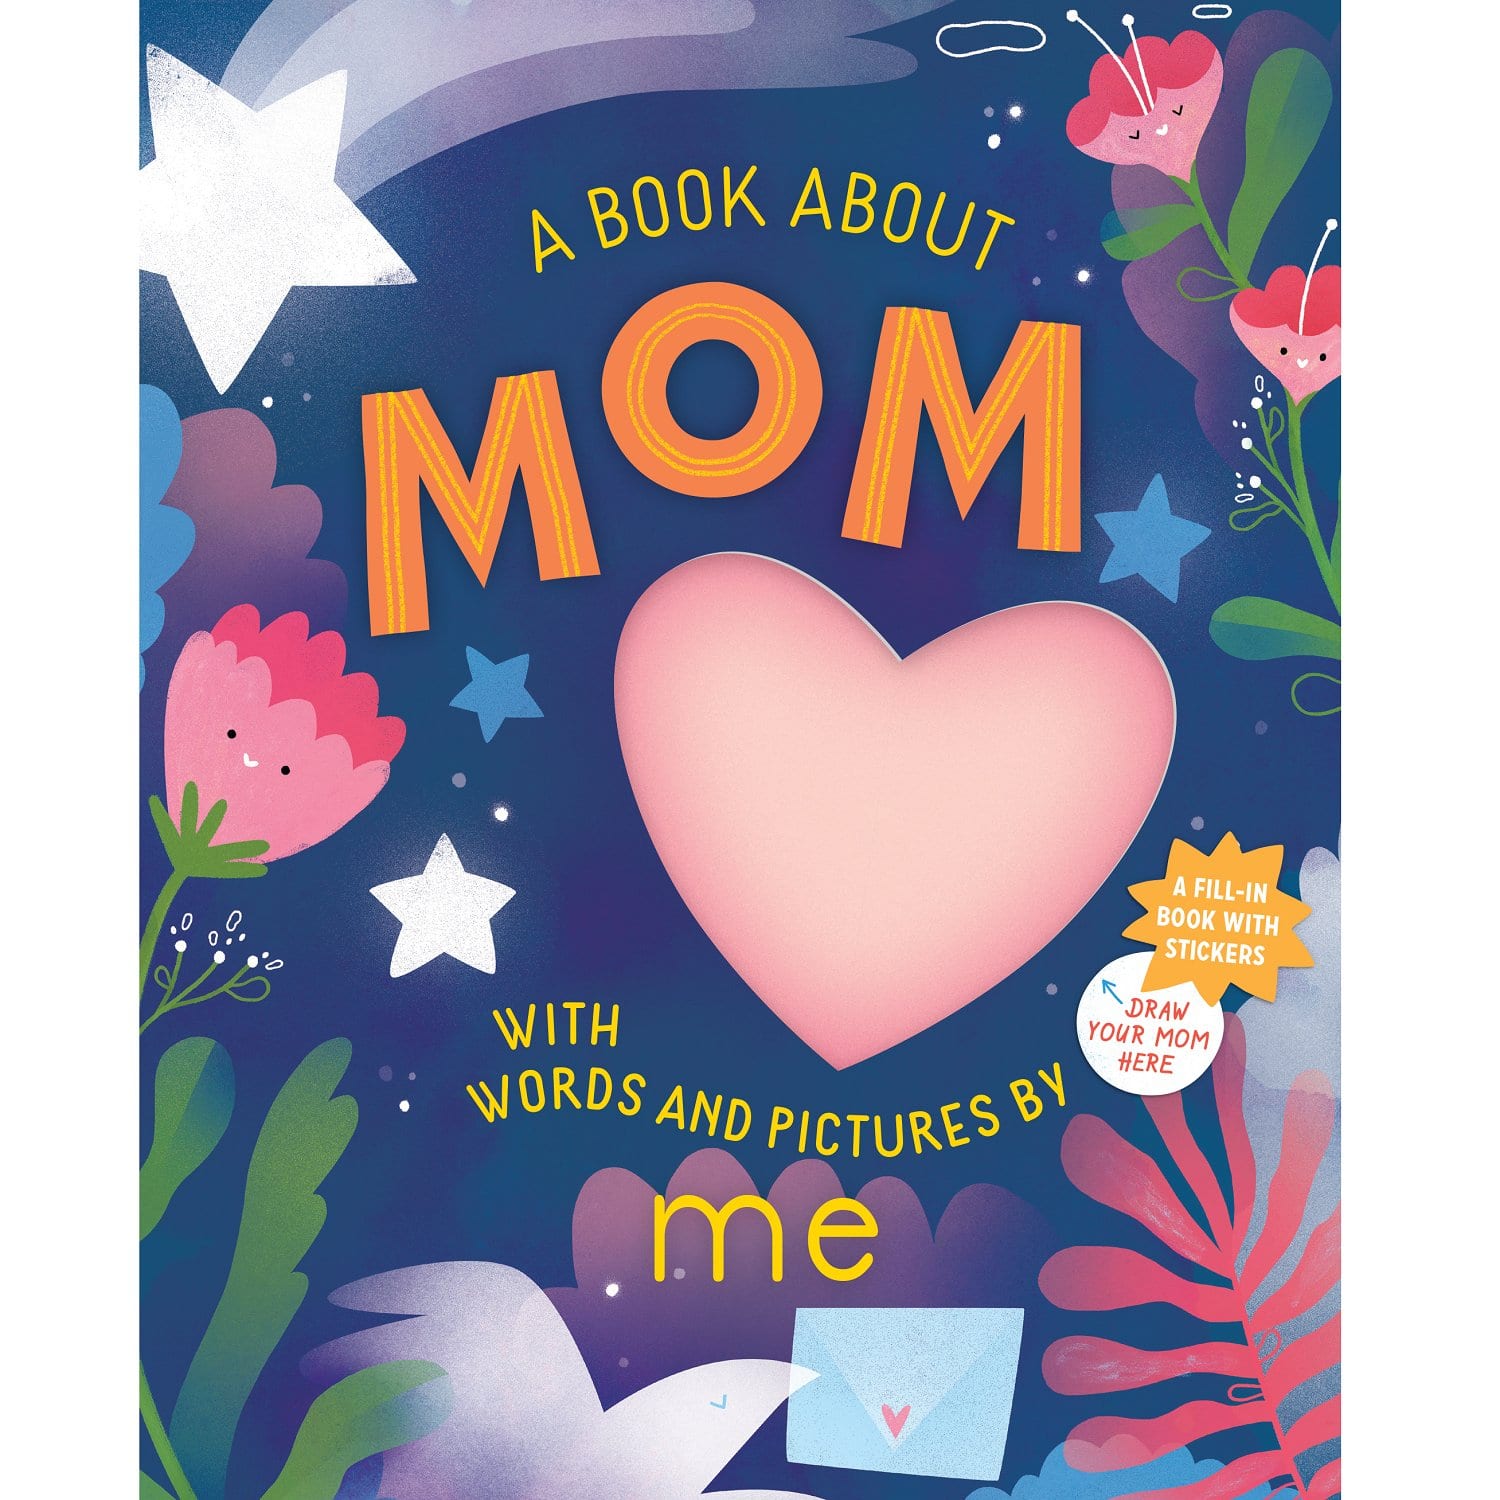 http://peekabooonline.com/cdn/shop/files/A-Book-About-Mom-With-Words-and-Pictures-By-Me.jpg?v=1689484088